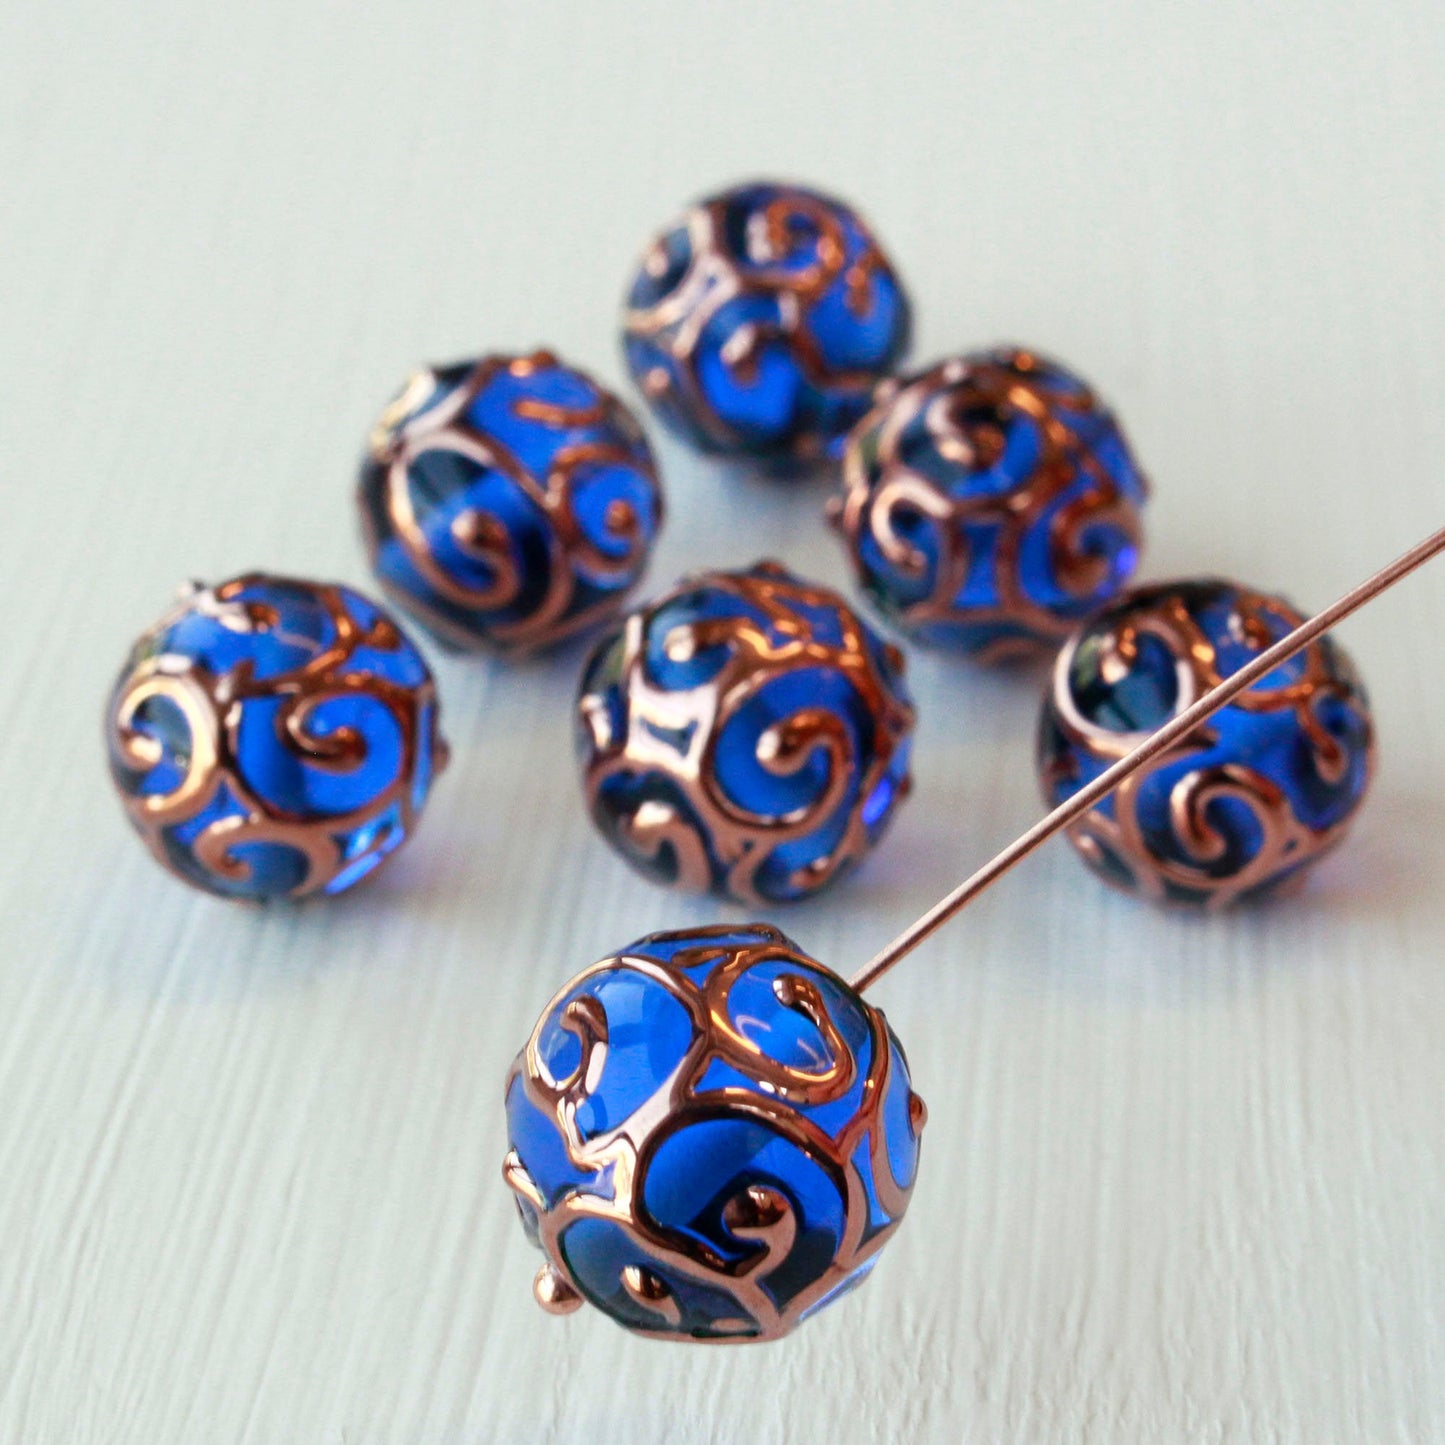 14mm Round Lampwork Beads - Sapphire Blue - 2, 4 or 8